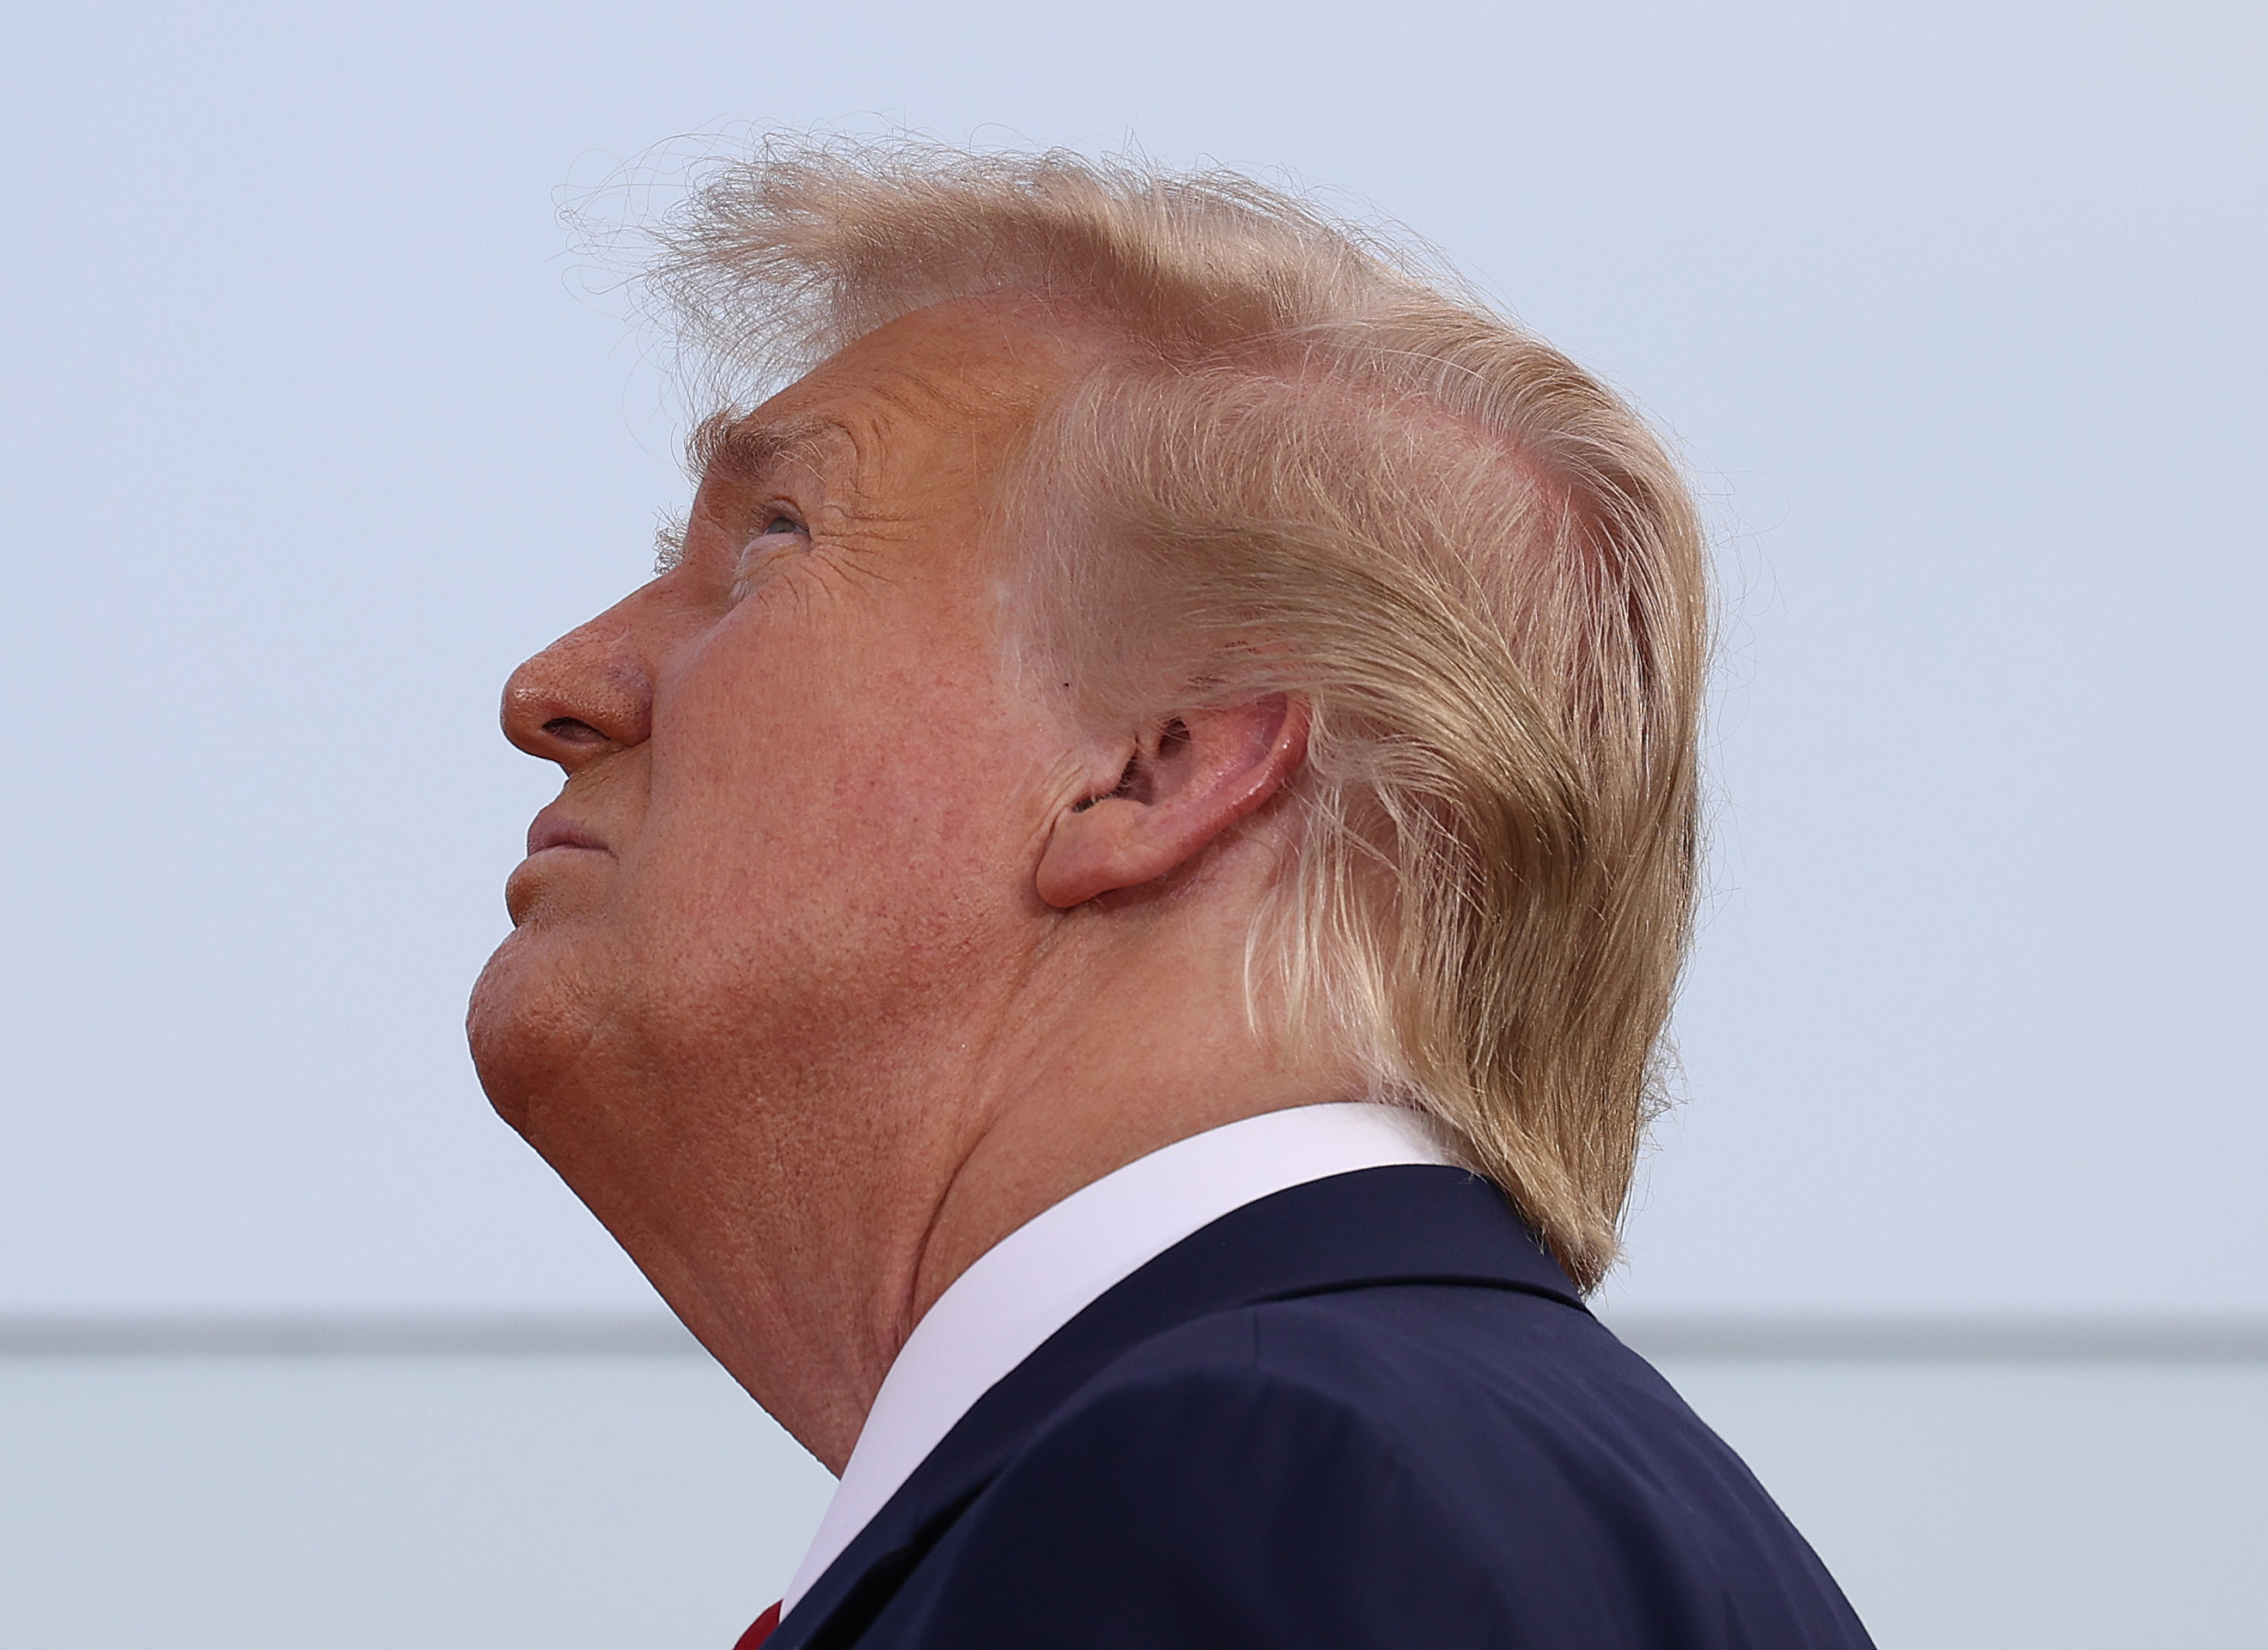 WASHINGTON, DC - JULY 04: President Donald Trump watches as military aircraft perform a flyover near the White House on July 04, 2020 in Washington, DC. President Trump is hosting a "Salute to America" celebration that includes flyovers by military aircraft and a large fireworks display. (Photo by Tasos Katopodis/Getty Images)